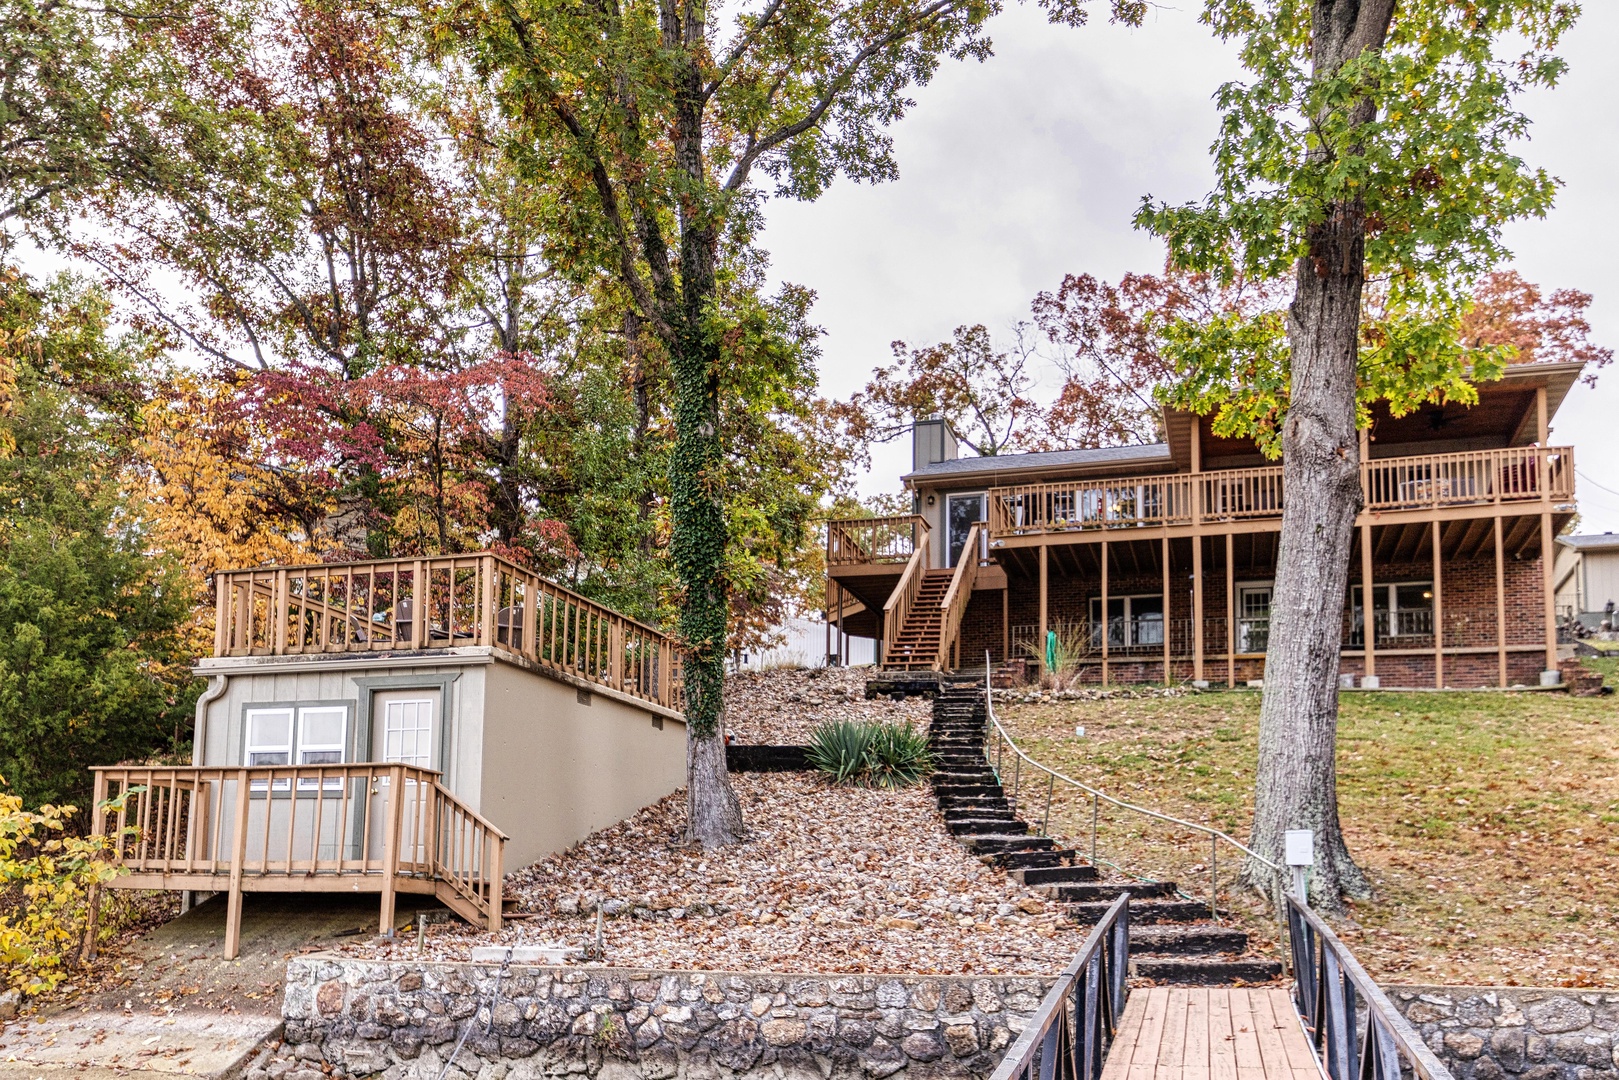 Take a stroll down the backyard steps to find yourself lakeside!